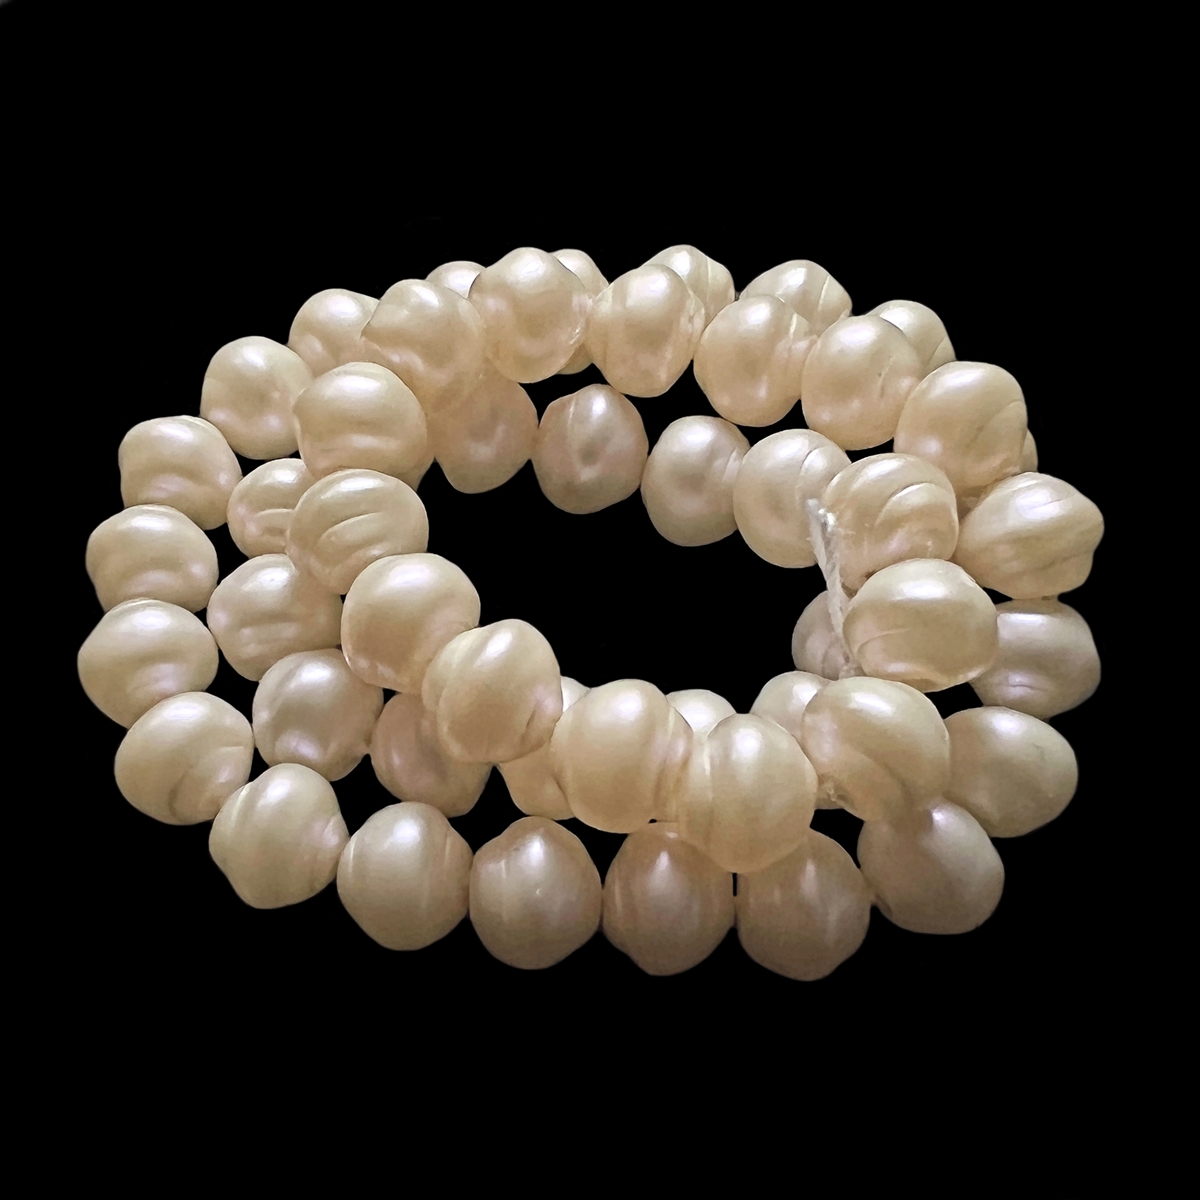 Czech glass snail pearls, pearl beads, pearls, snail pearls